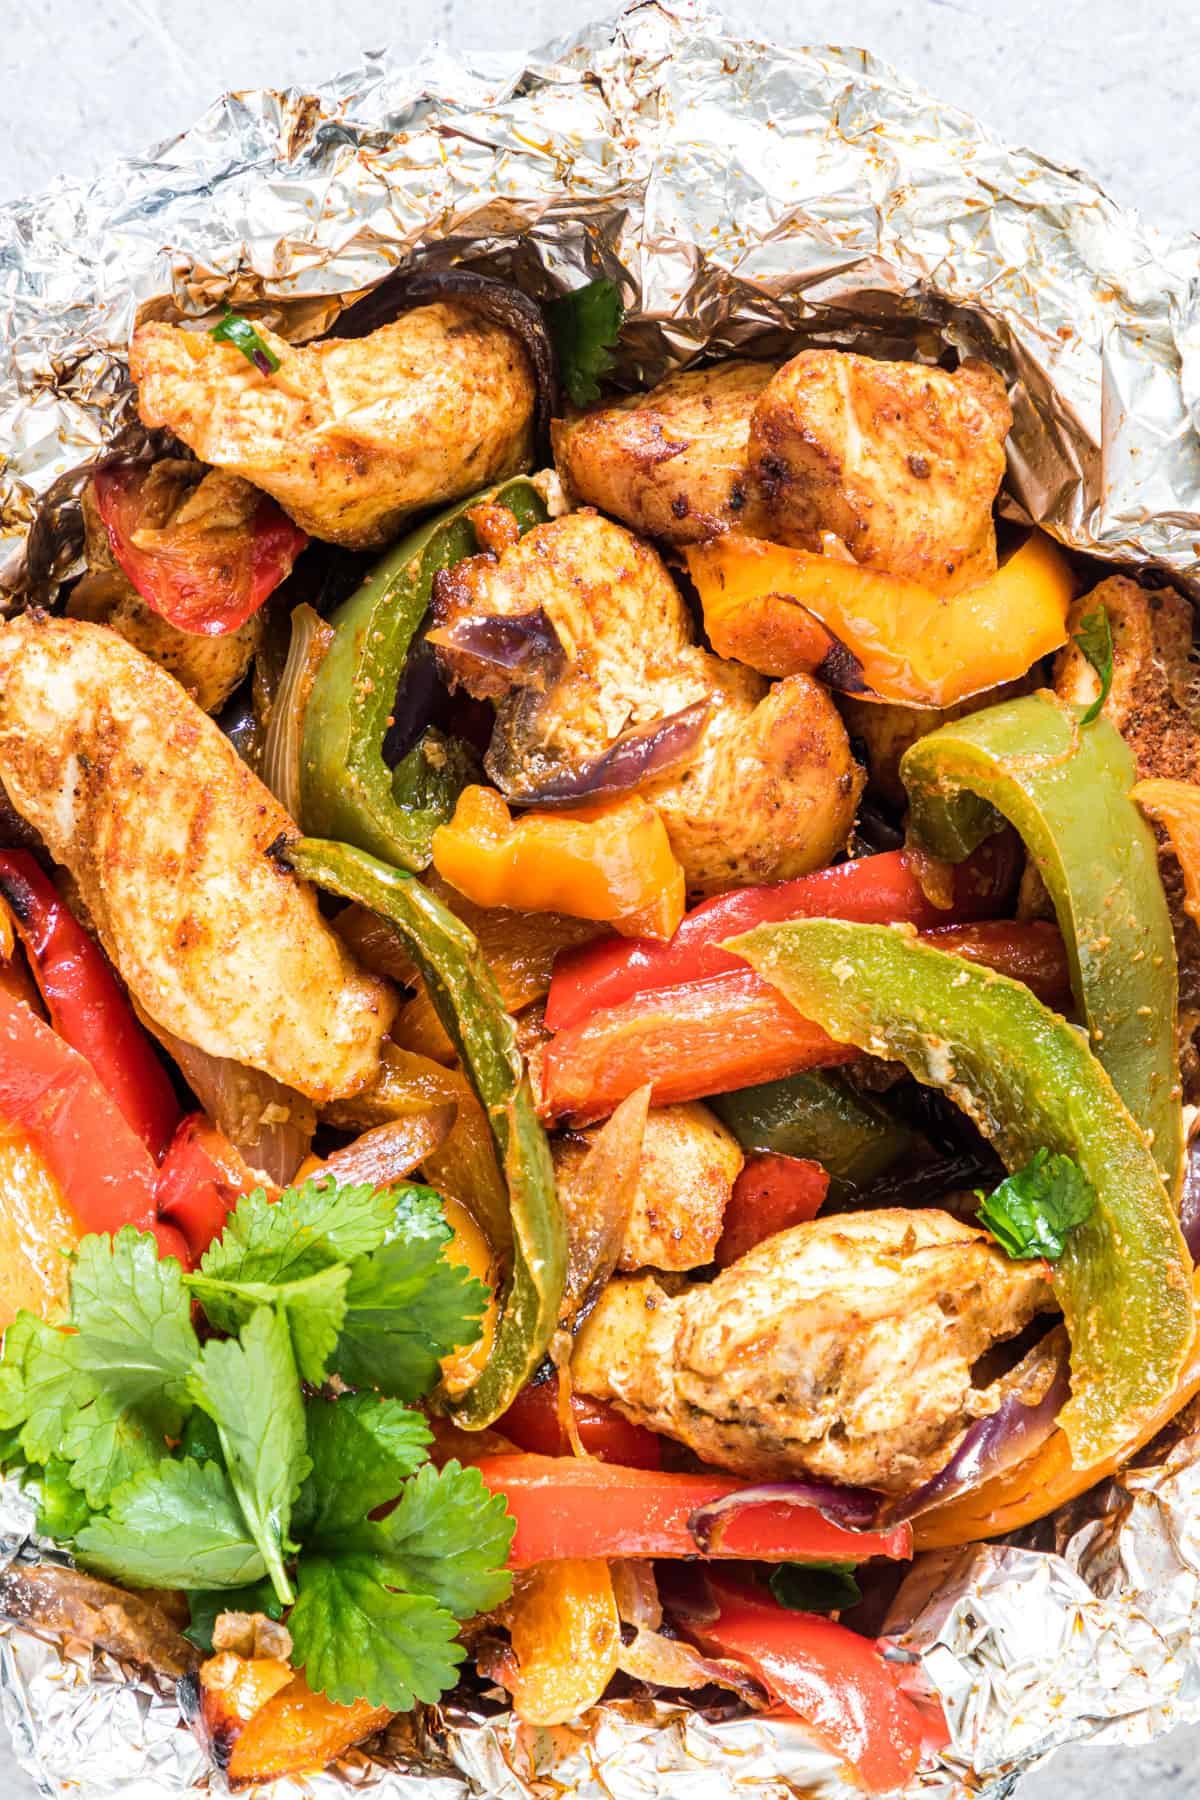 Strips of chicken and peppers cooked in foil.